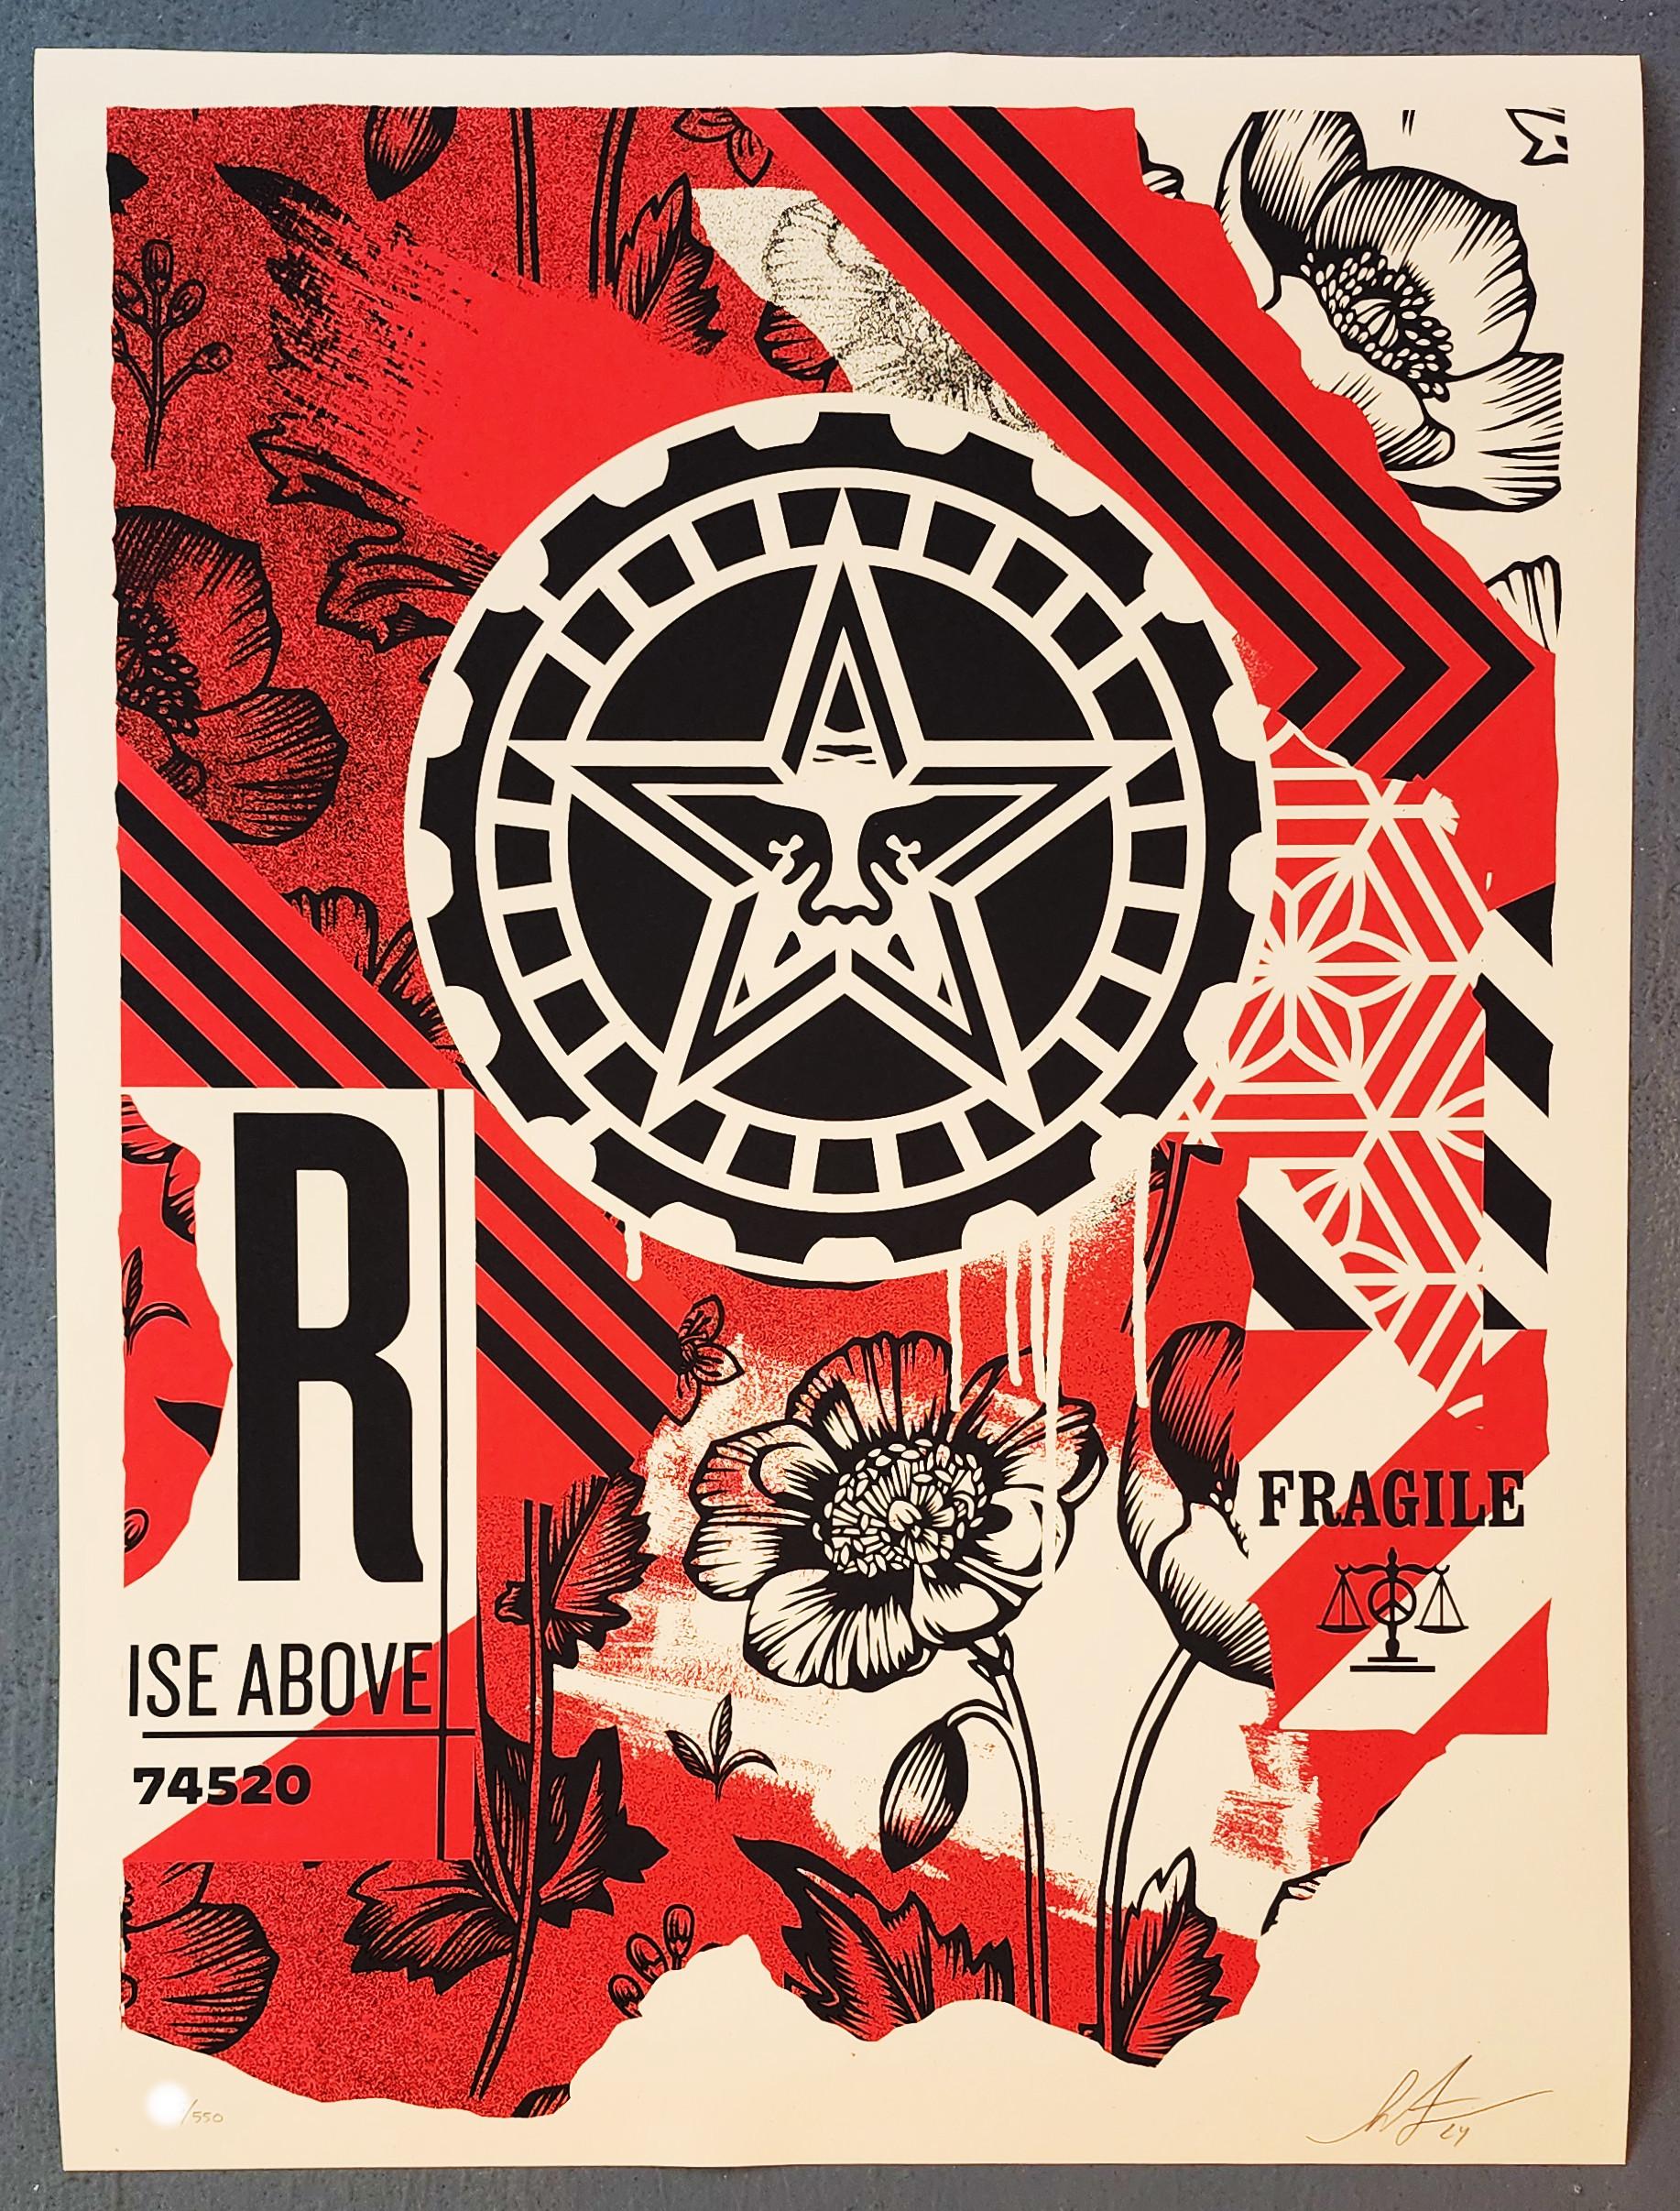 Shepard Fairey
Gears of Justice (Star Gear, Empowerment, Industrious, Leveling the playing field)
Screen print on thick cream White Speckletone paper
Year: 2024
Size: 24x18 inches
Edition: 550
Signed, dated and numbered by hand
COA provided
Ref.: